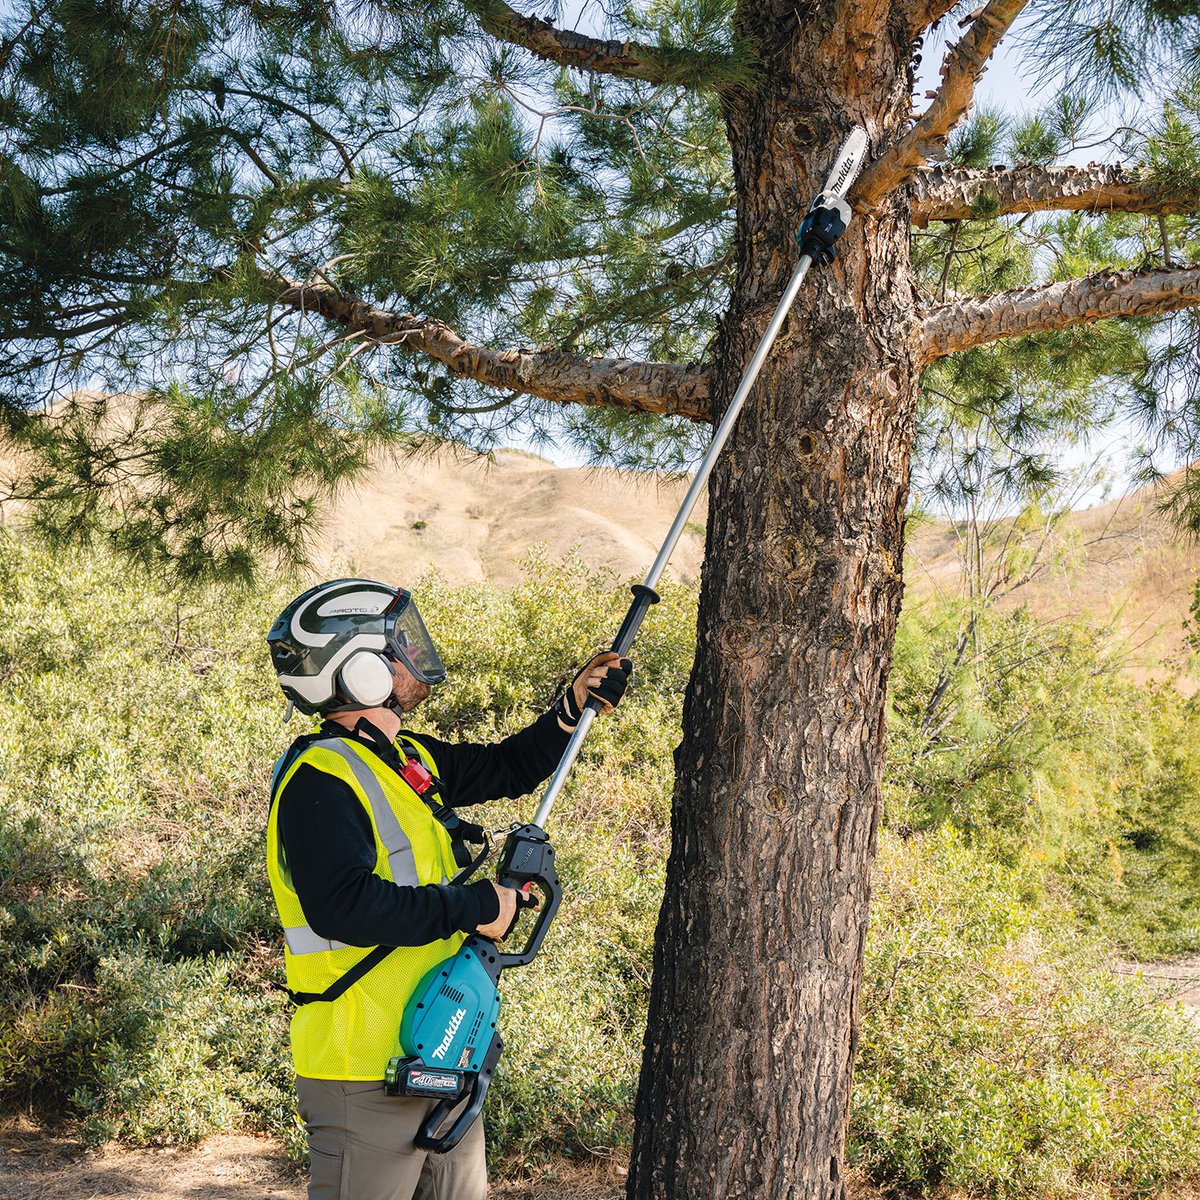 The 40V max XGT® 10' Pole Saw (GAU01) is 8' long allowing users to reach higher branches. The Makita-built brushless motor delivers 35cc gas performance. saw. It delivers up to 150 cuts in 4x4 cedar on a single charge of an XGT® 4.0Ah battery. #makitatools #makitausa #makitalxgt